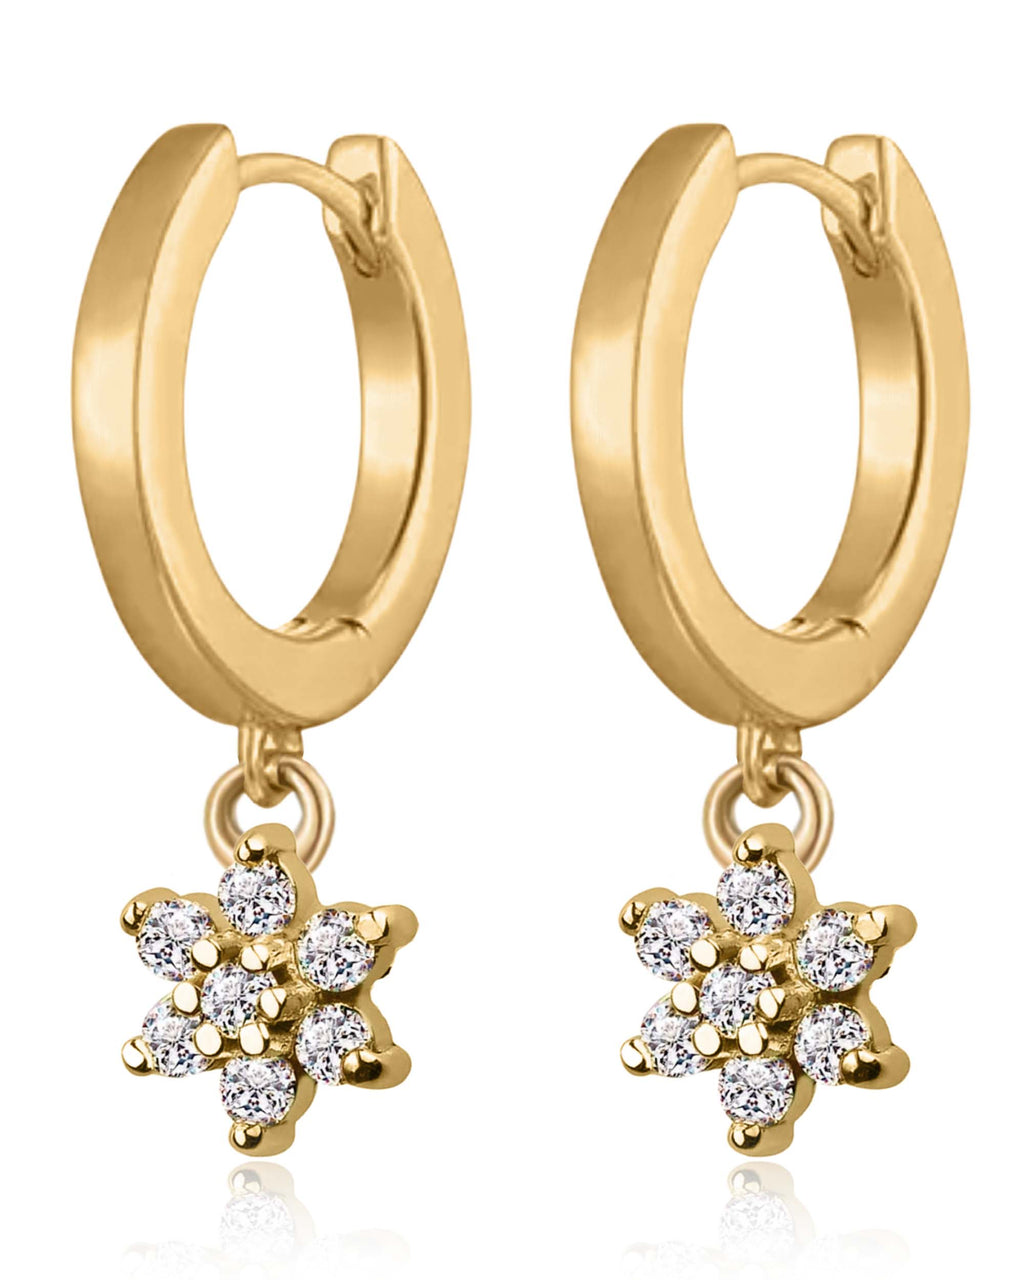 1pair Fashionable Women's Gold-plated Long Bar Earings With Exquisite  Rhinestone Detail, Suitable For Daily Wear